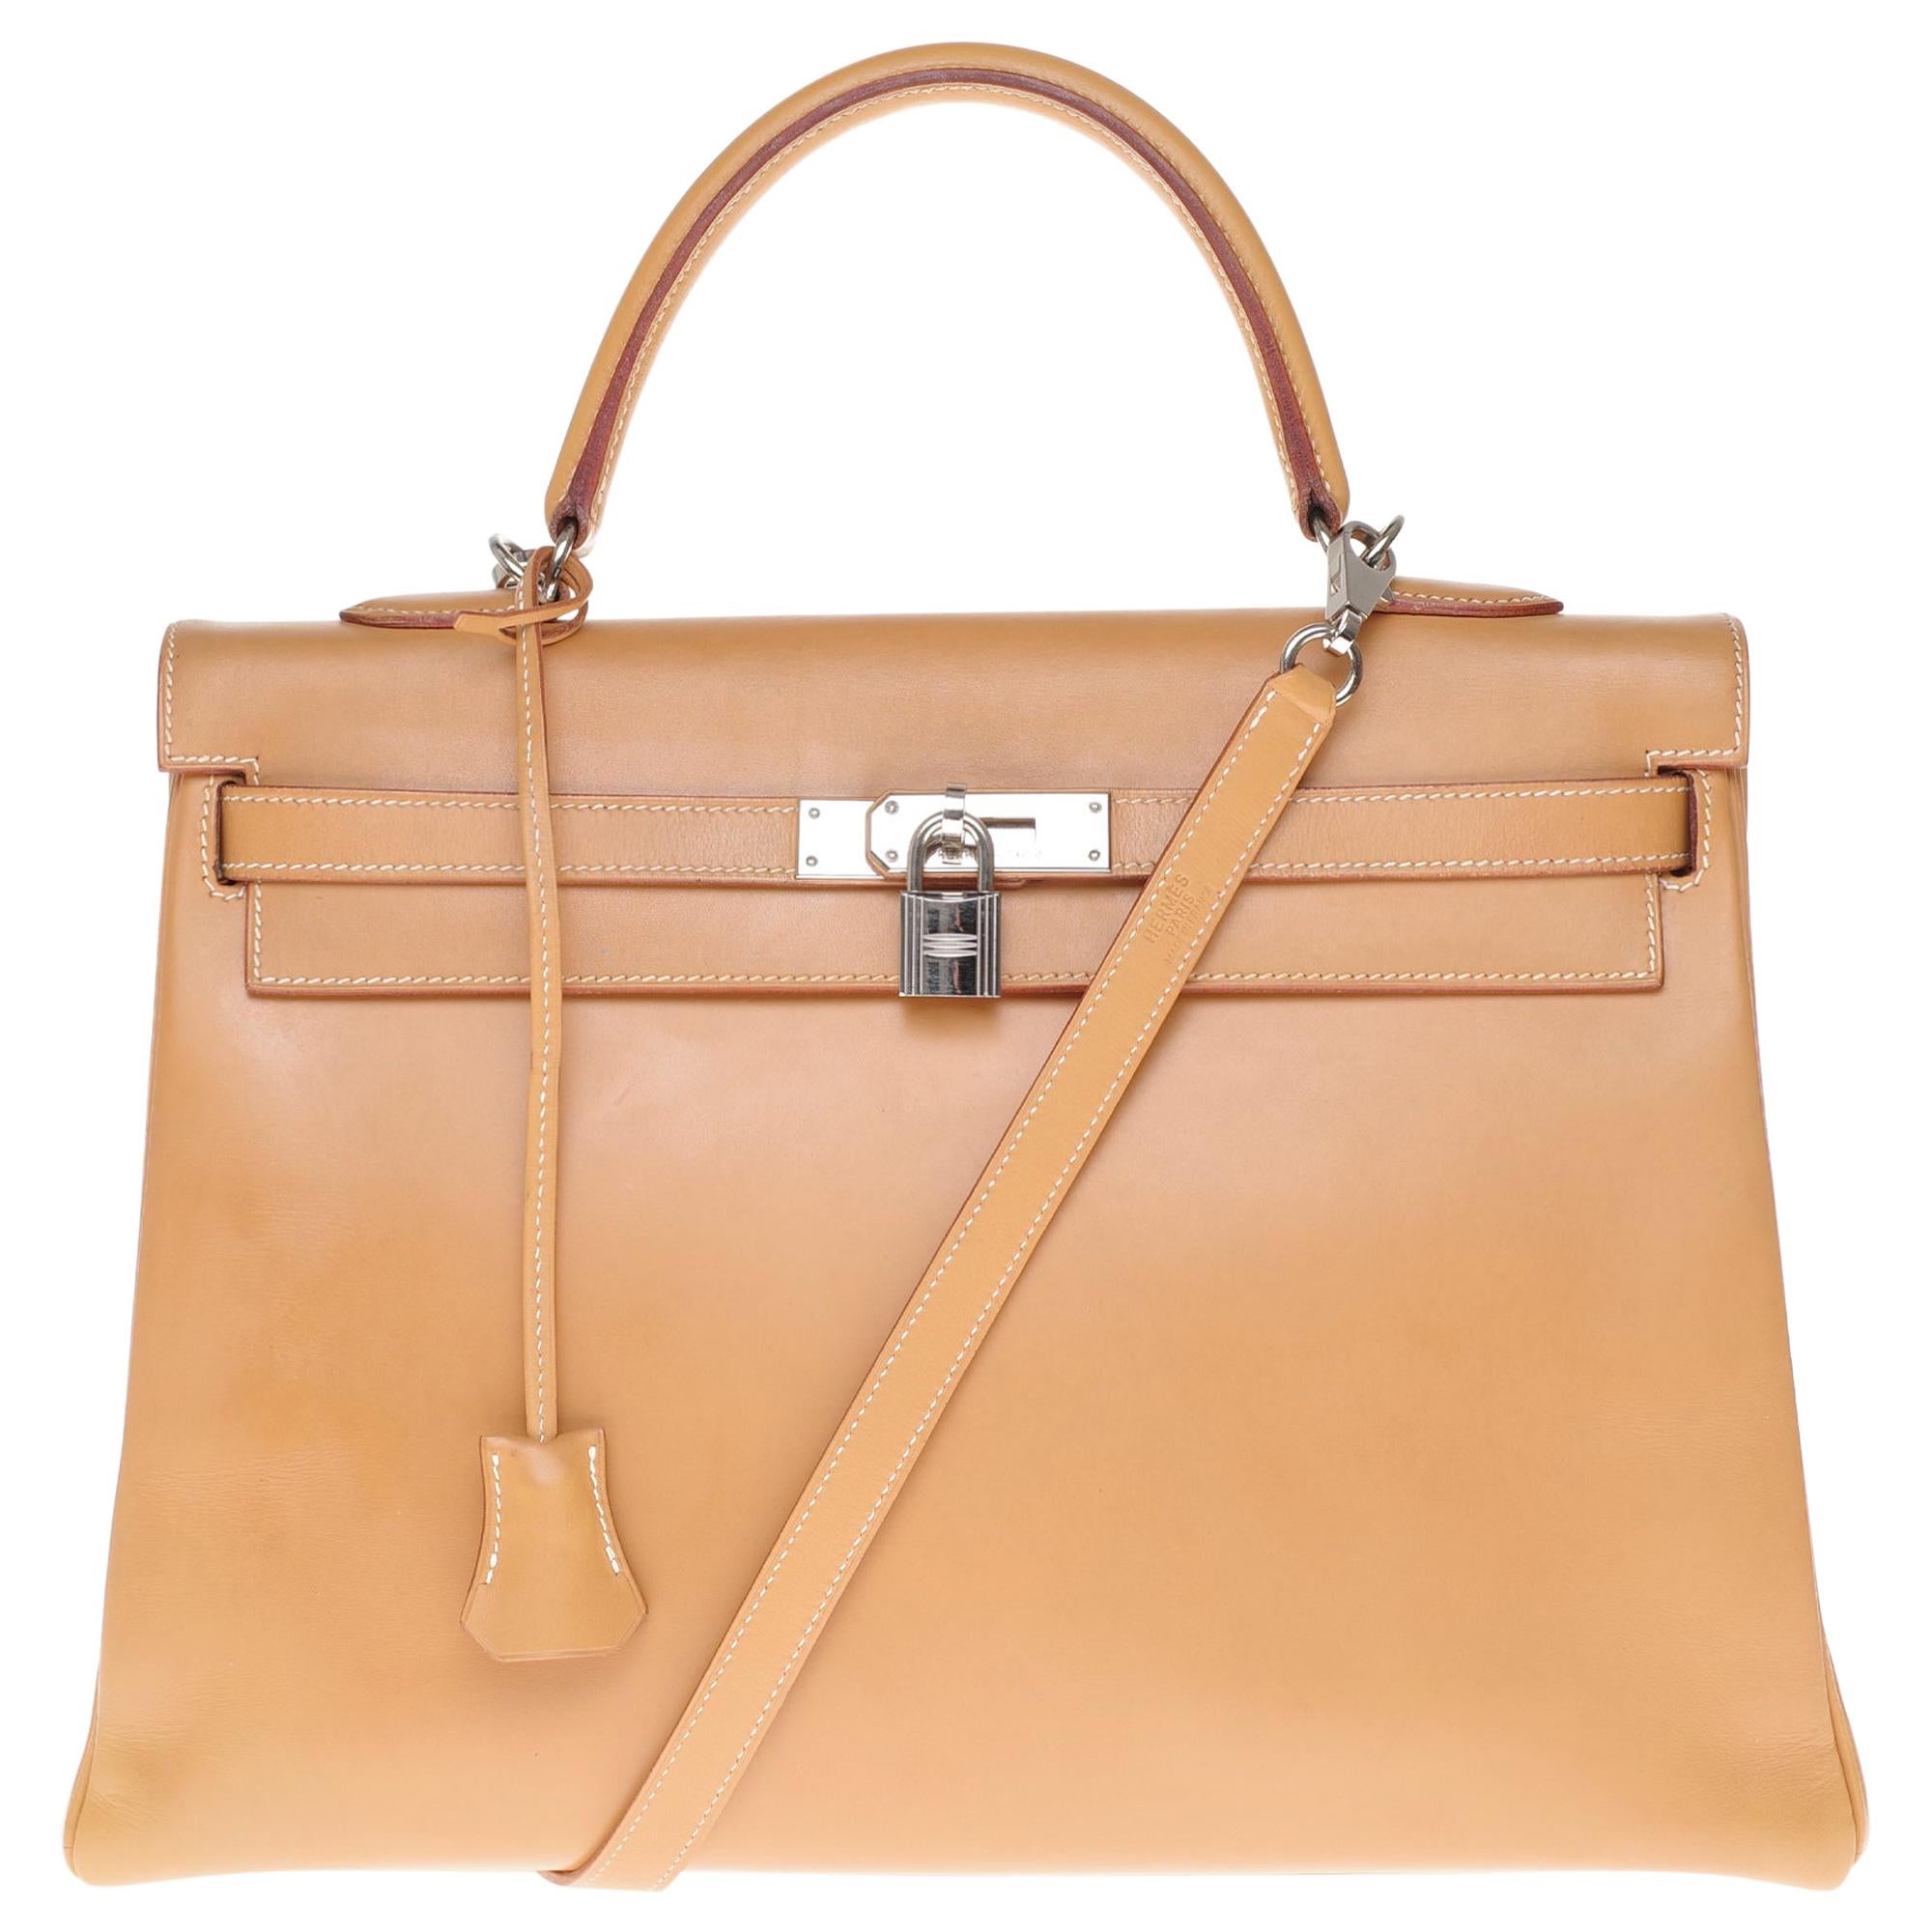 Hermès Kelly 35 handbag in natural calf leather with strap and silver hardware